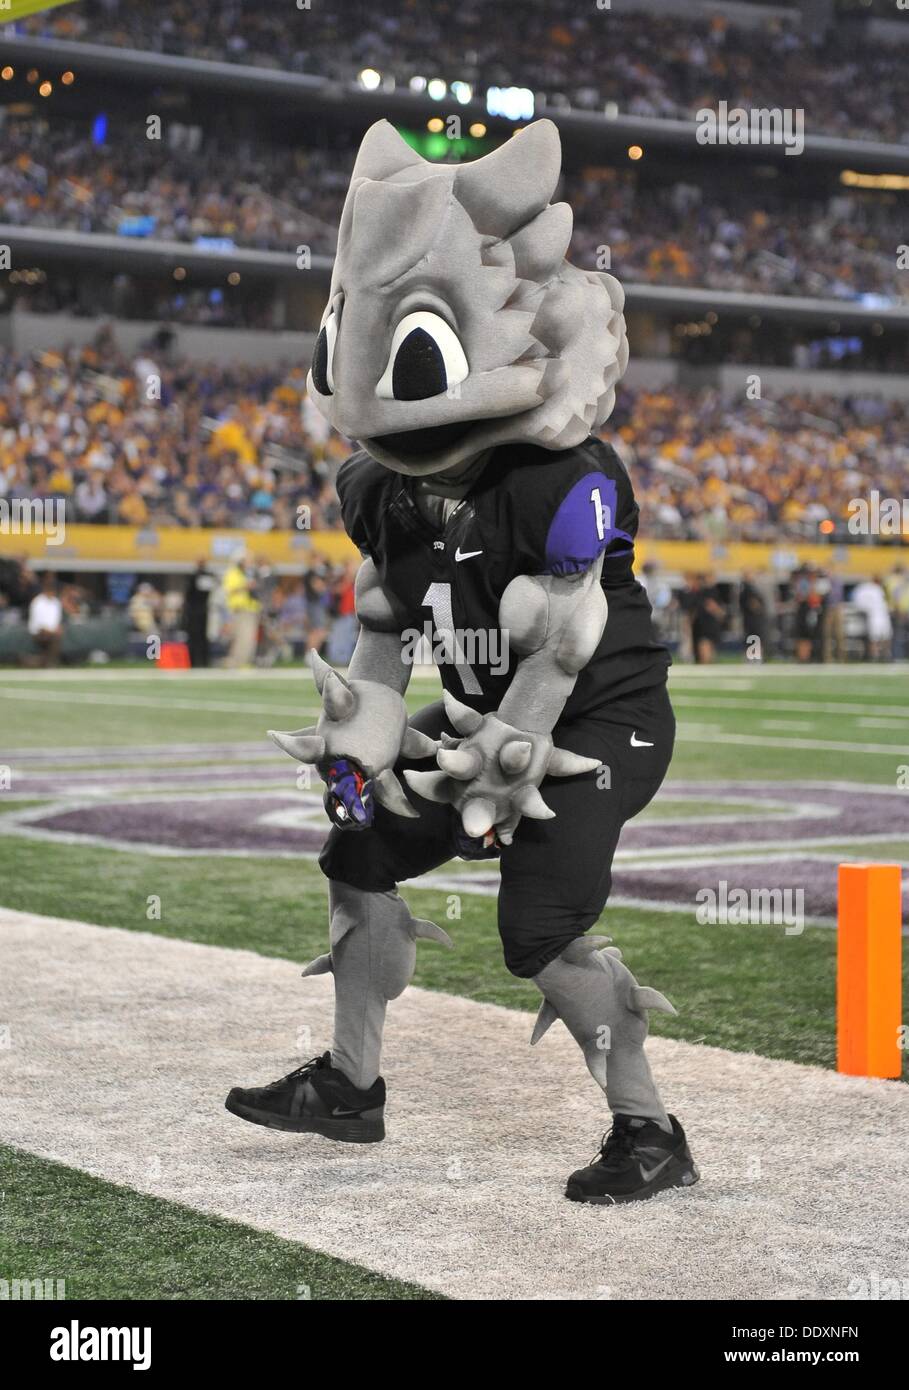 Aug. 31,2013:.TCU Horned Frog mascot in action.in a NCAA football game between the LSU Tigers and the TCU Horned Frogs at AT&T Stadium in Arlington, Texas.. Stock Photo